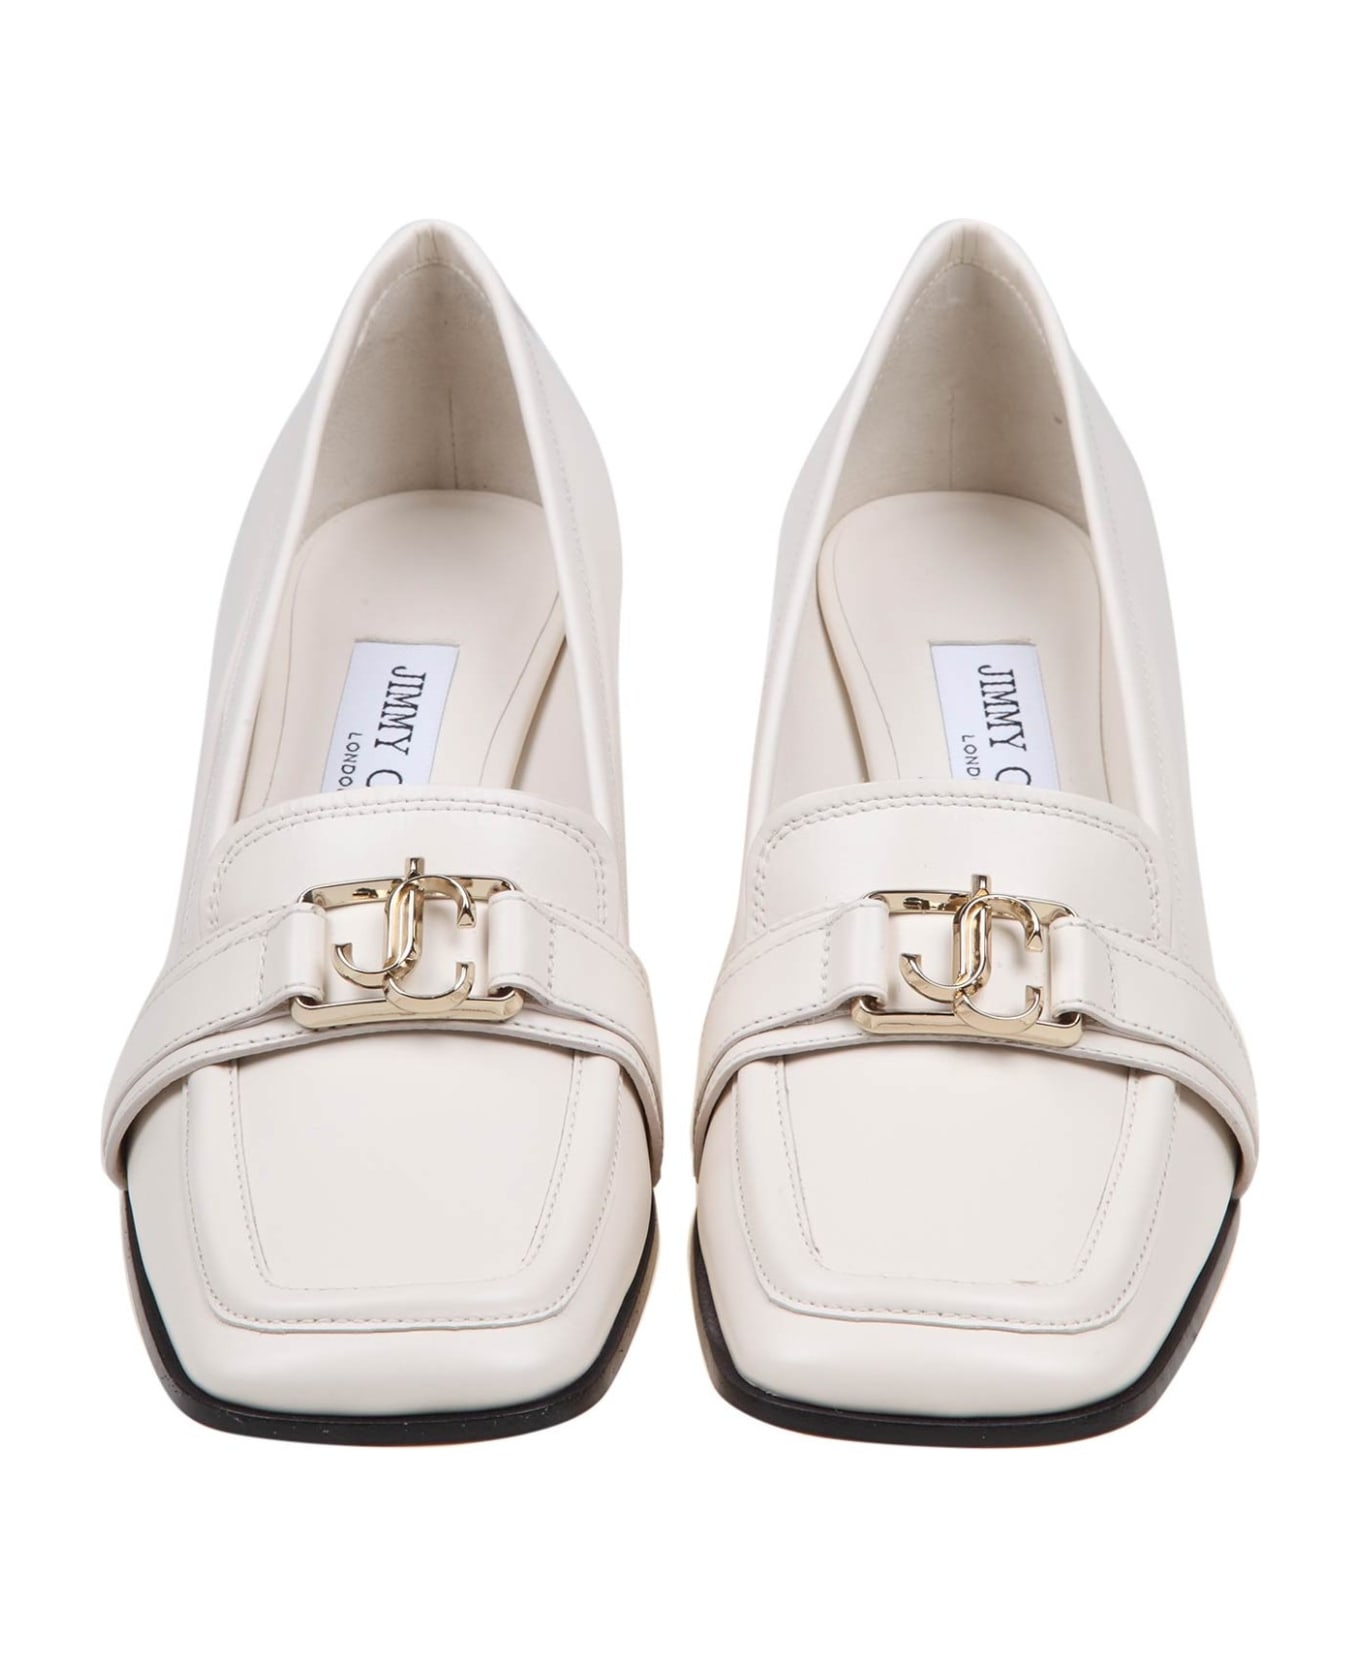 Jimmy Choo Loafers With Heel In Milk Color Leather - Latte/gold